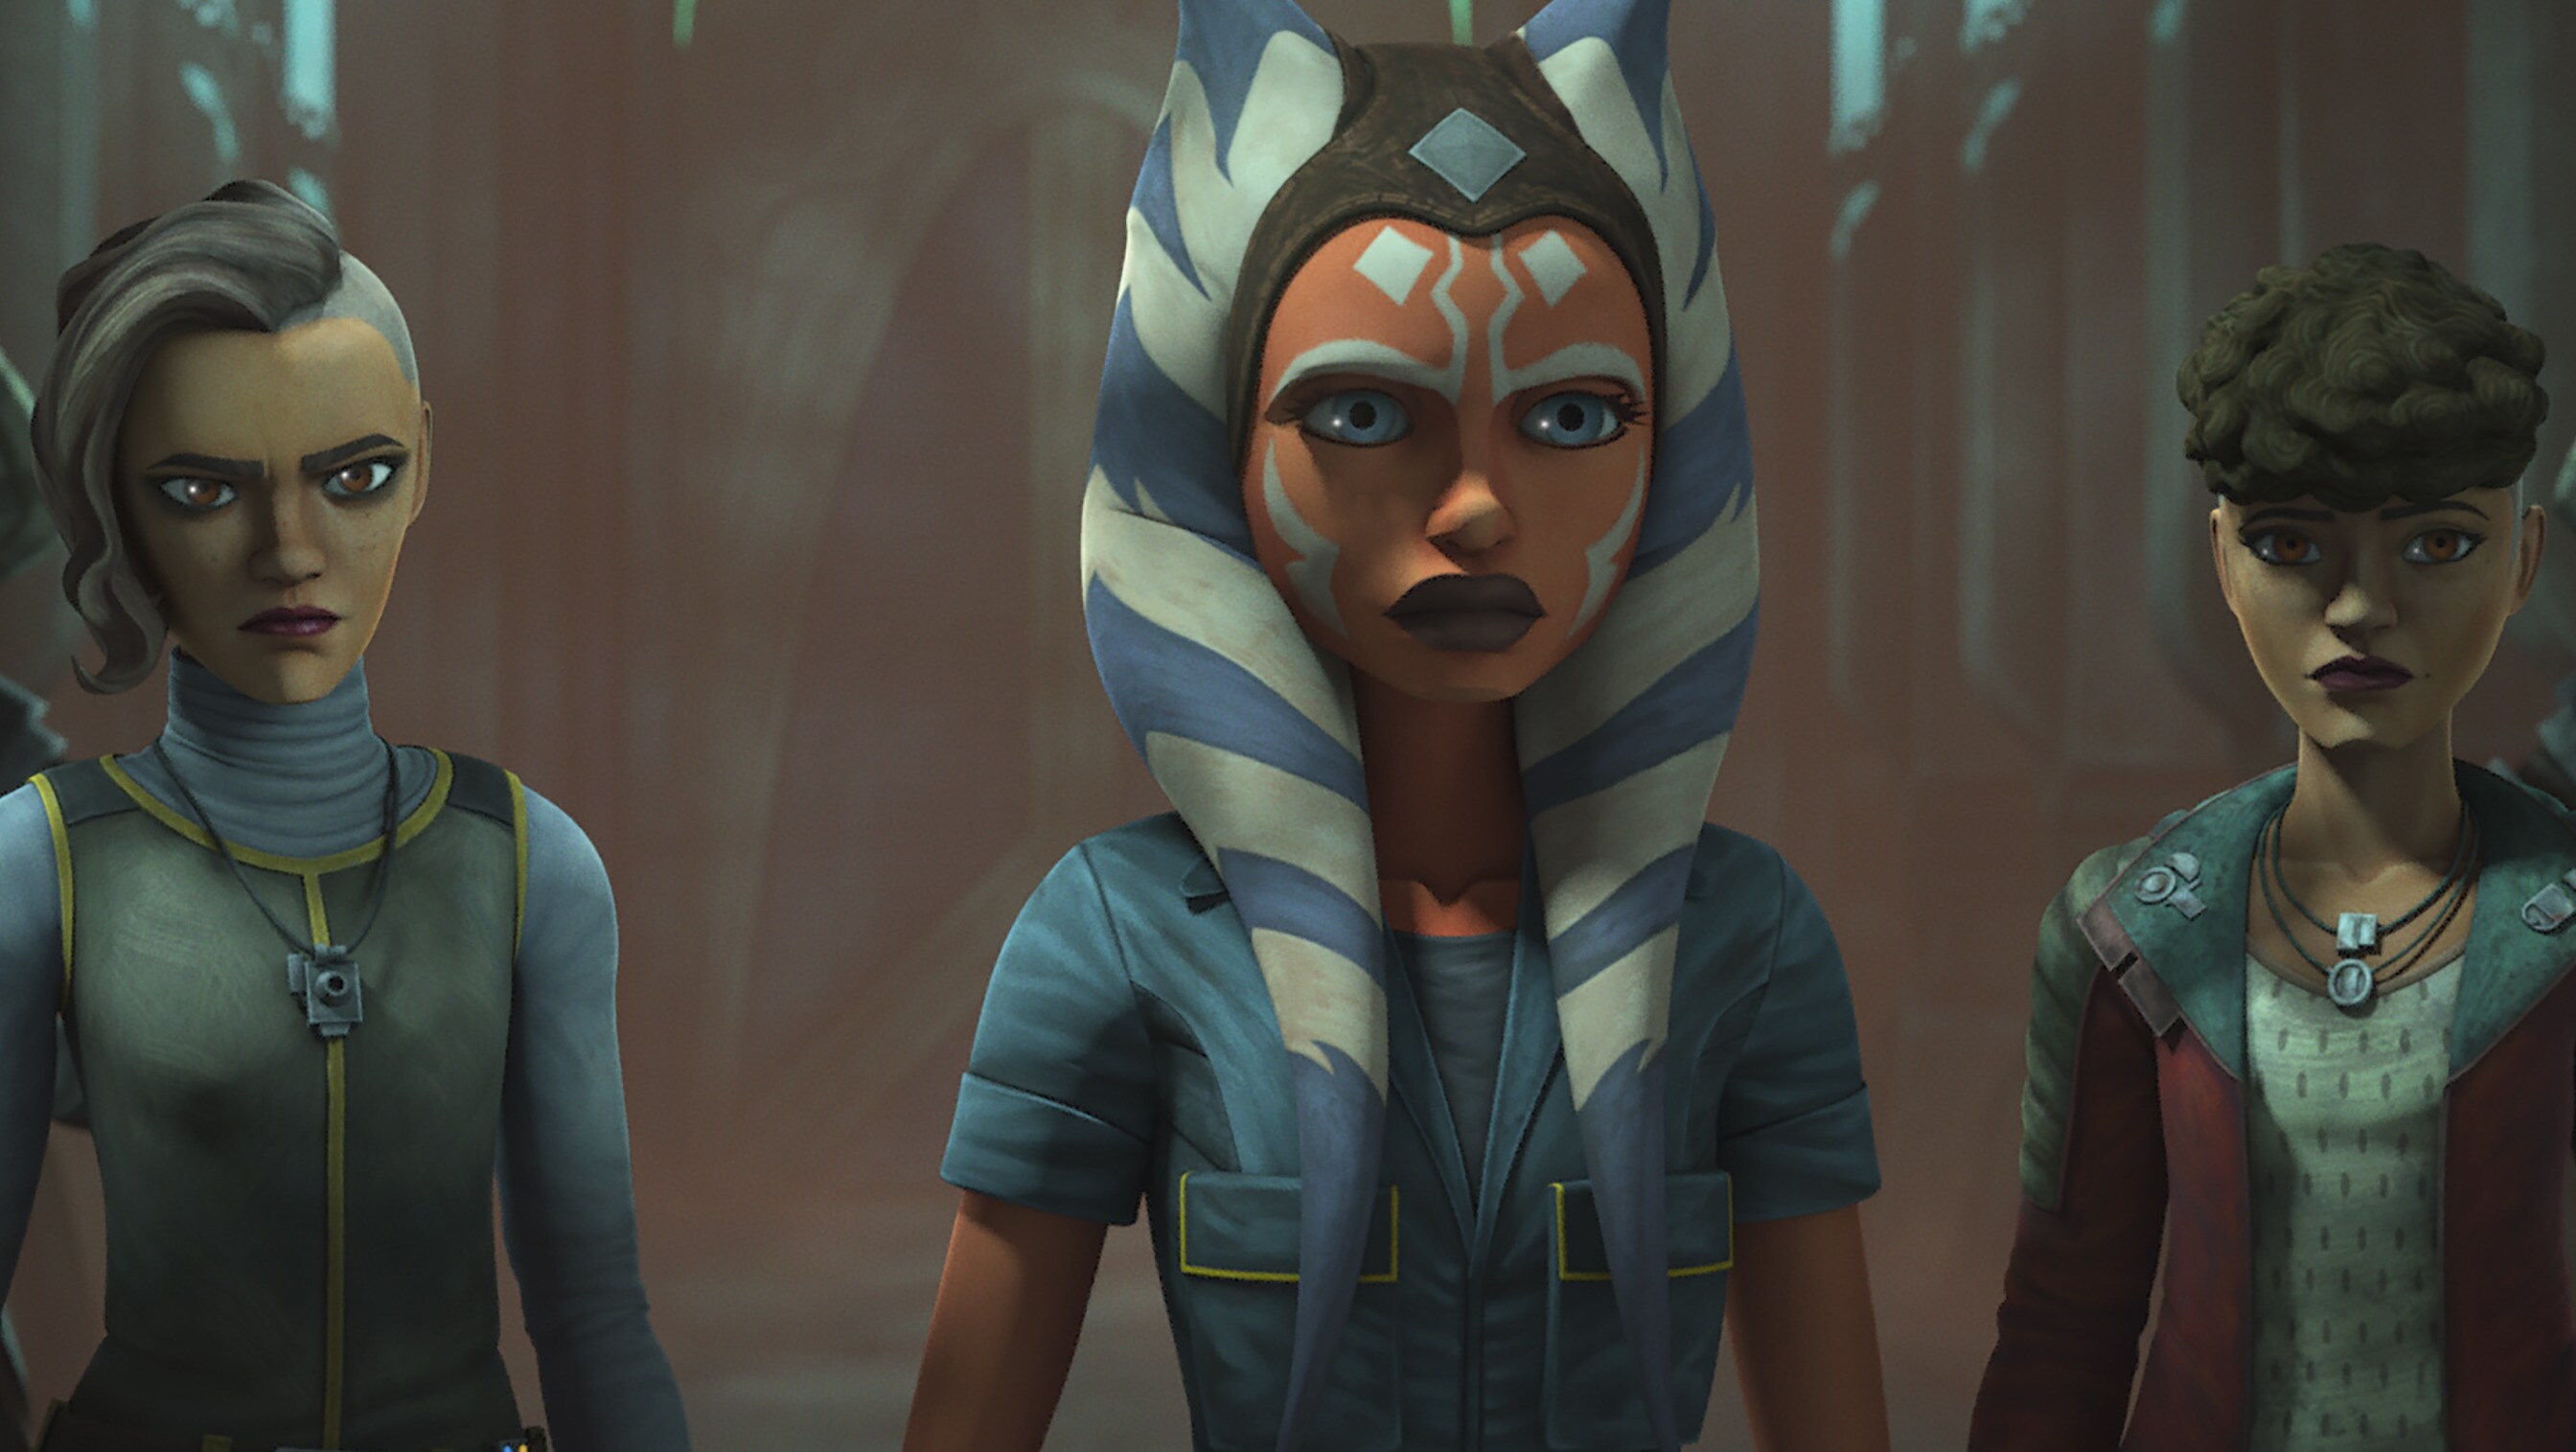 Ahsoka makes a deal to free the Martez sisters in STAR WARS: THE CLONE WARS, exclusively on Disney+.